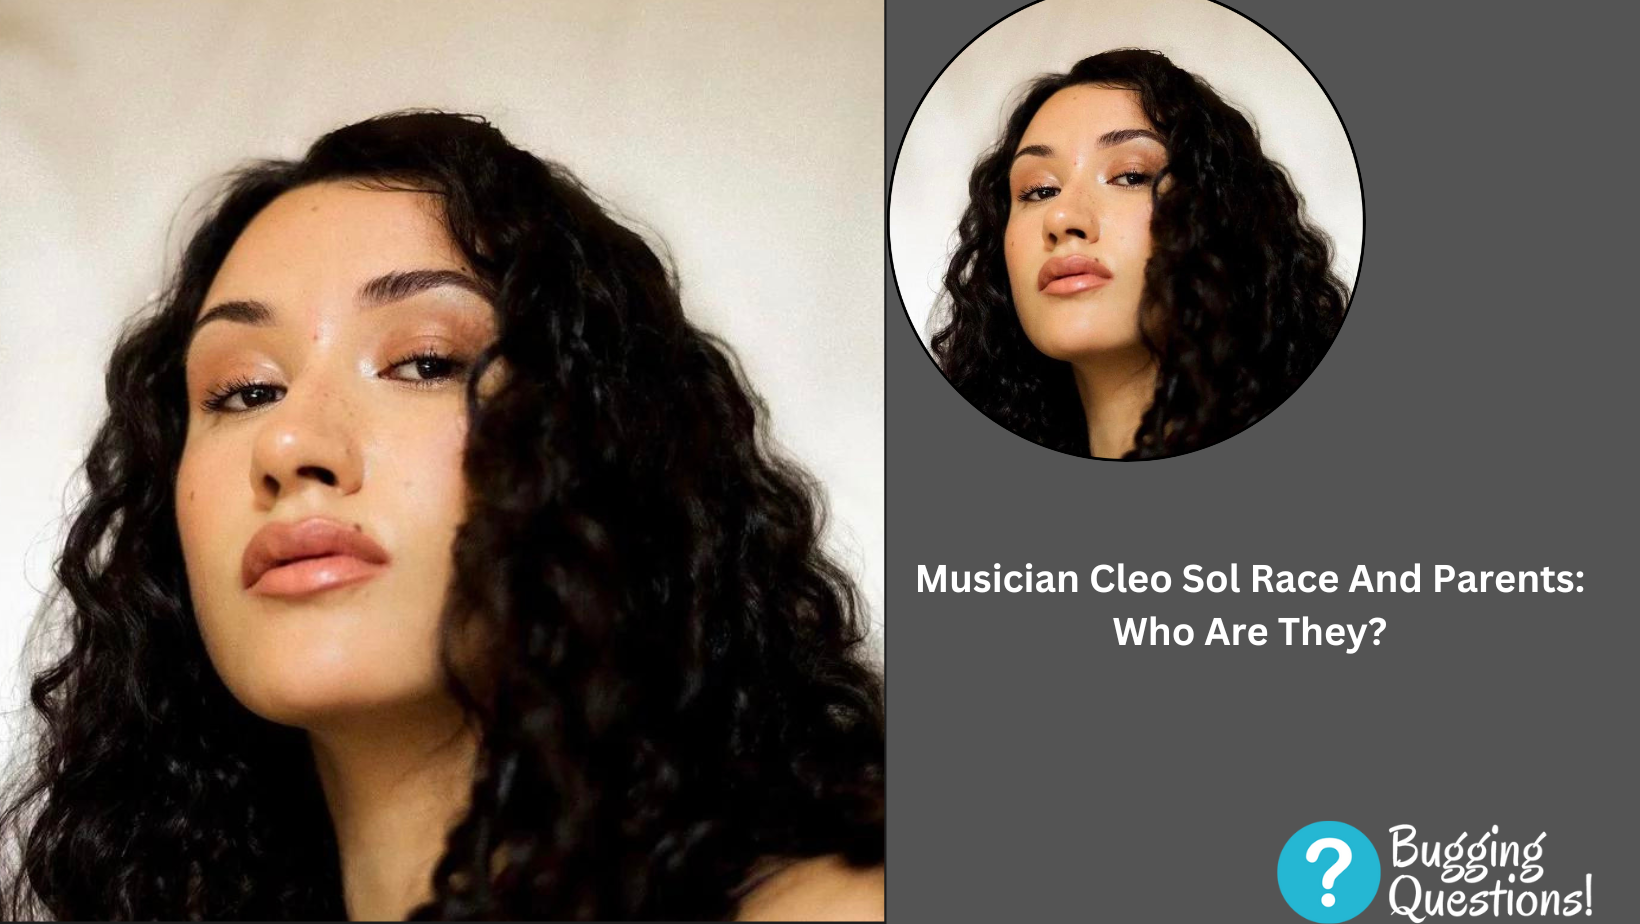 Musician Cleo Sol Race And Parents: Who Are They?